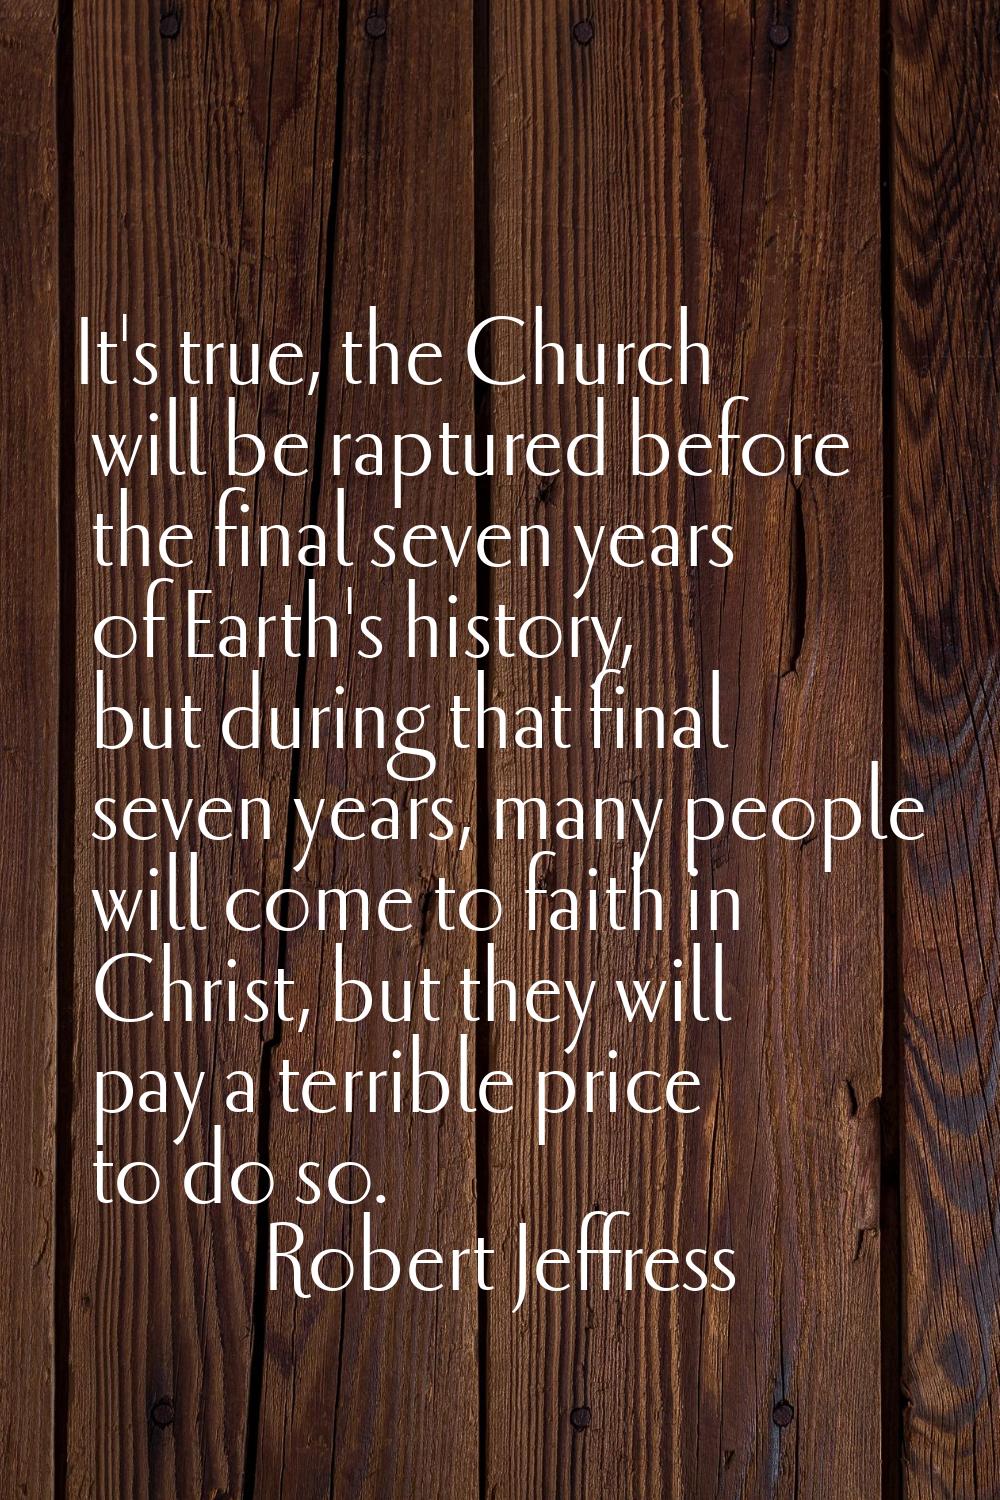 It's true, the Church will be raptured before the final seven years of Earth's history, but during 